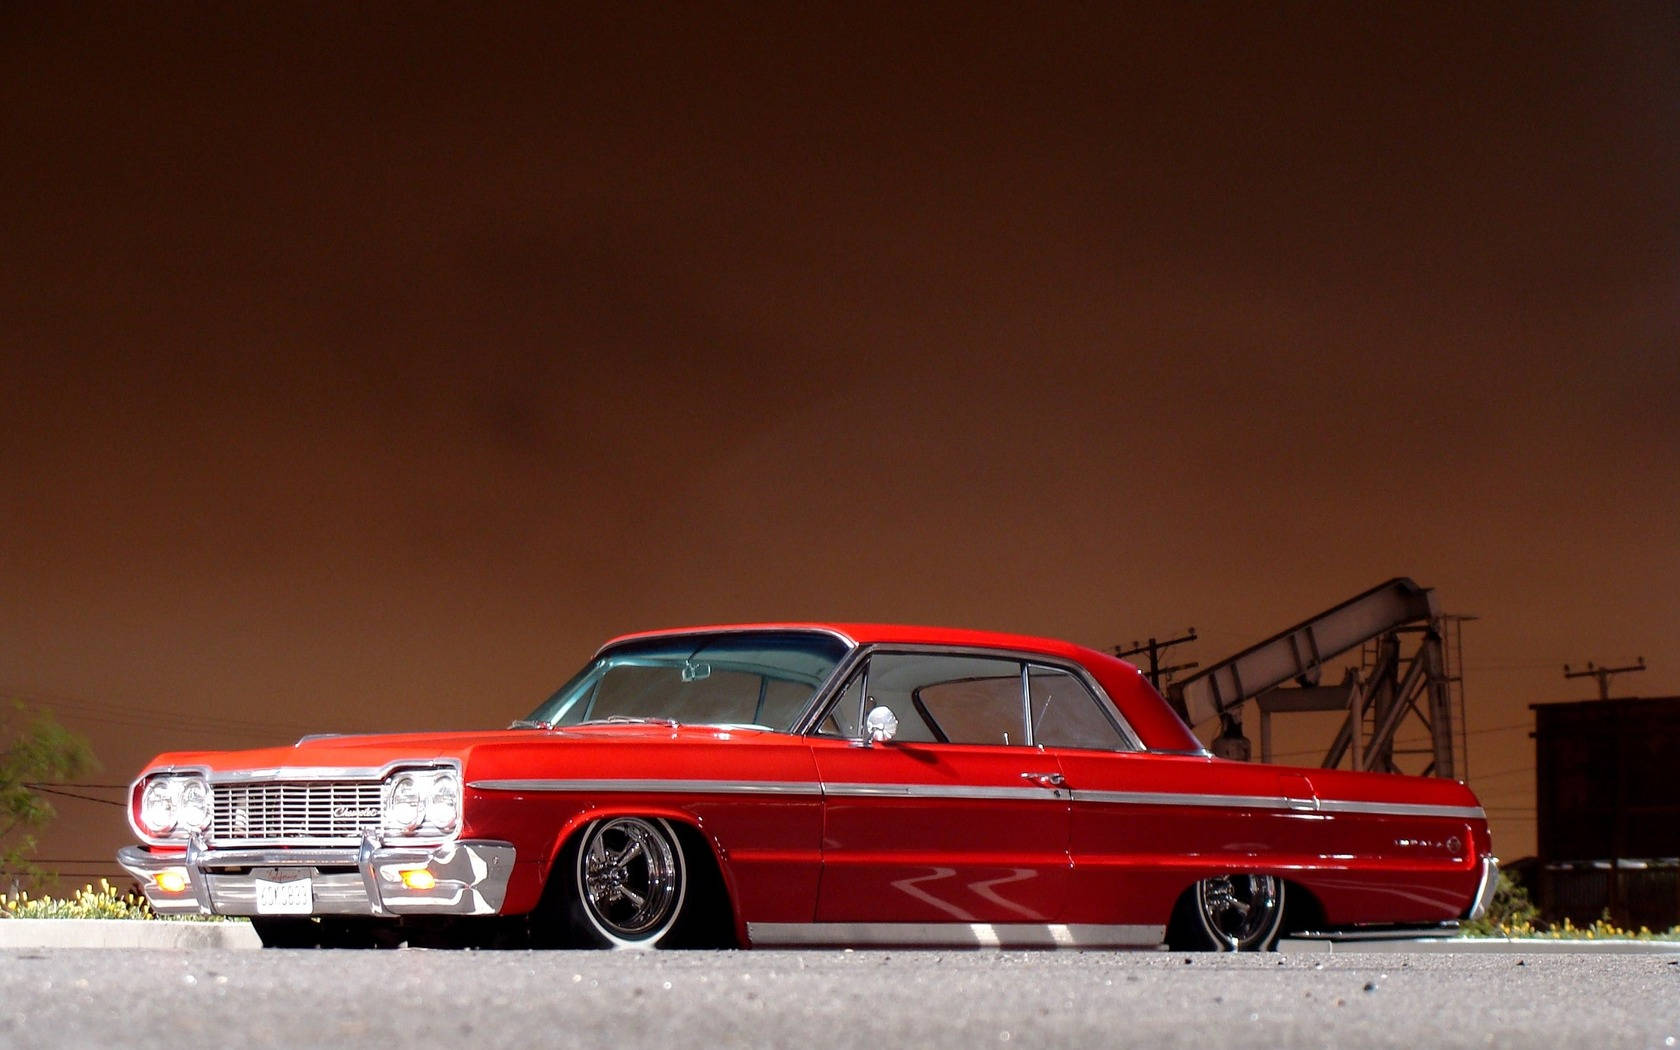 Lowrider Impala Against Brown Sky